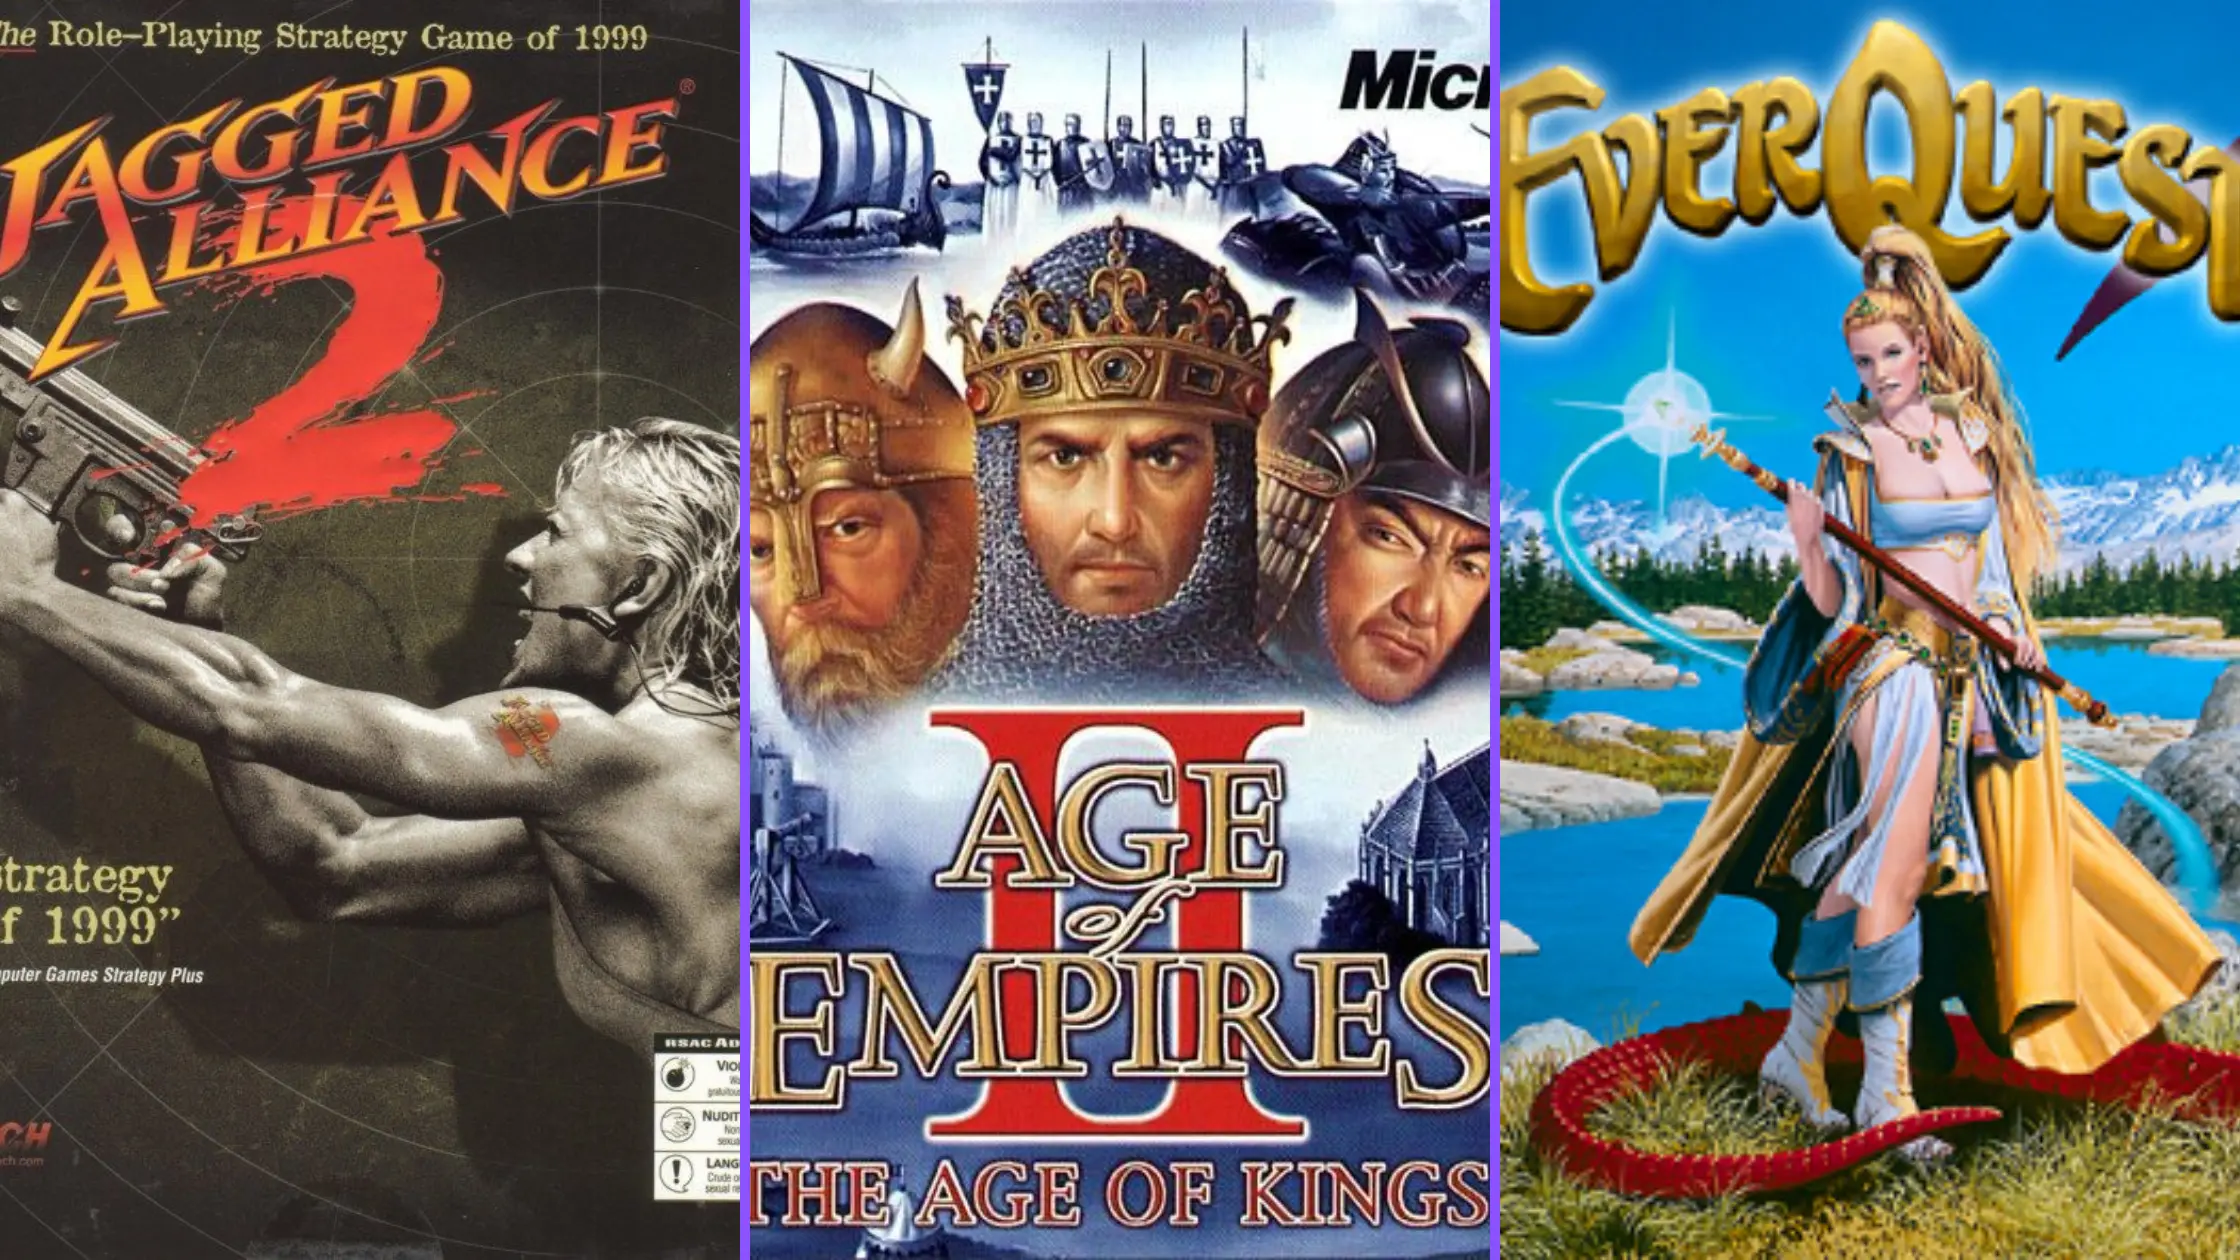 Pc Games From 1999 Classic Games from 1999